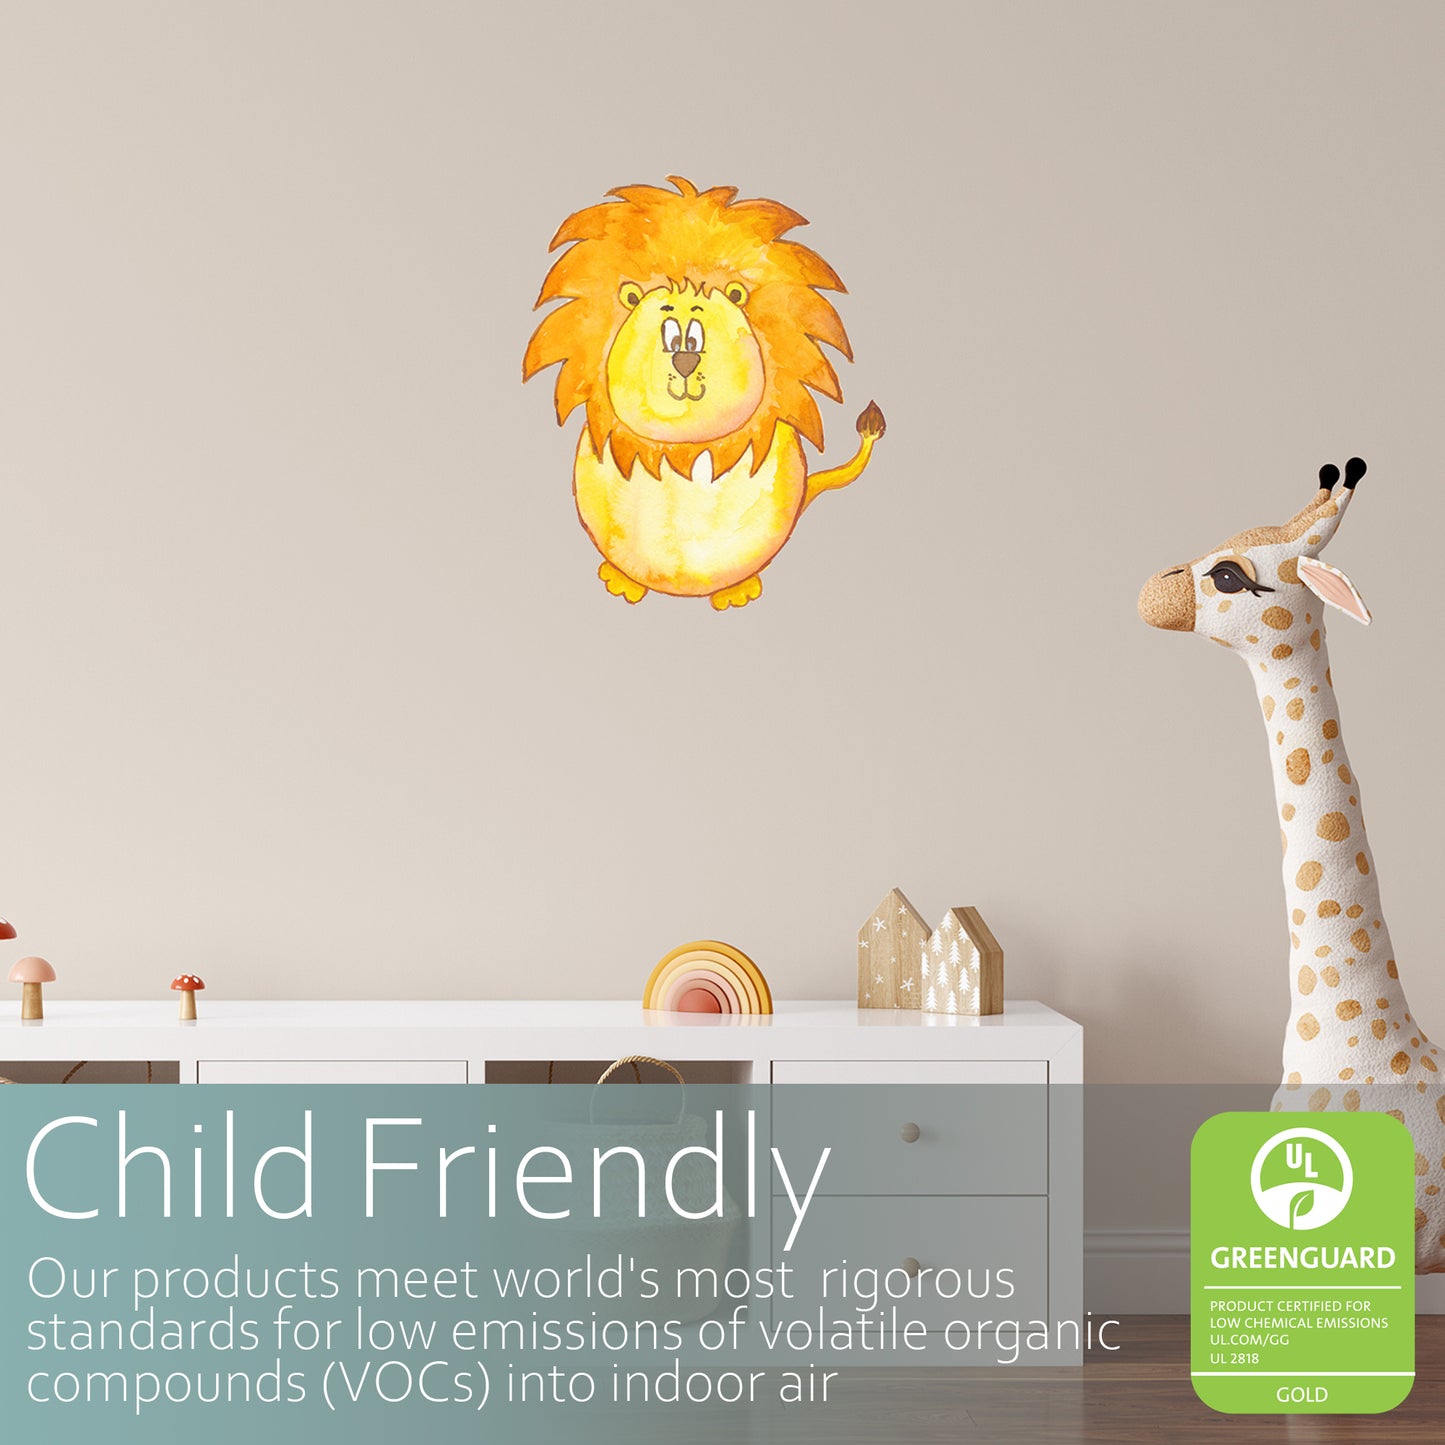 Watercolour lion | Fabric wall stickers